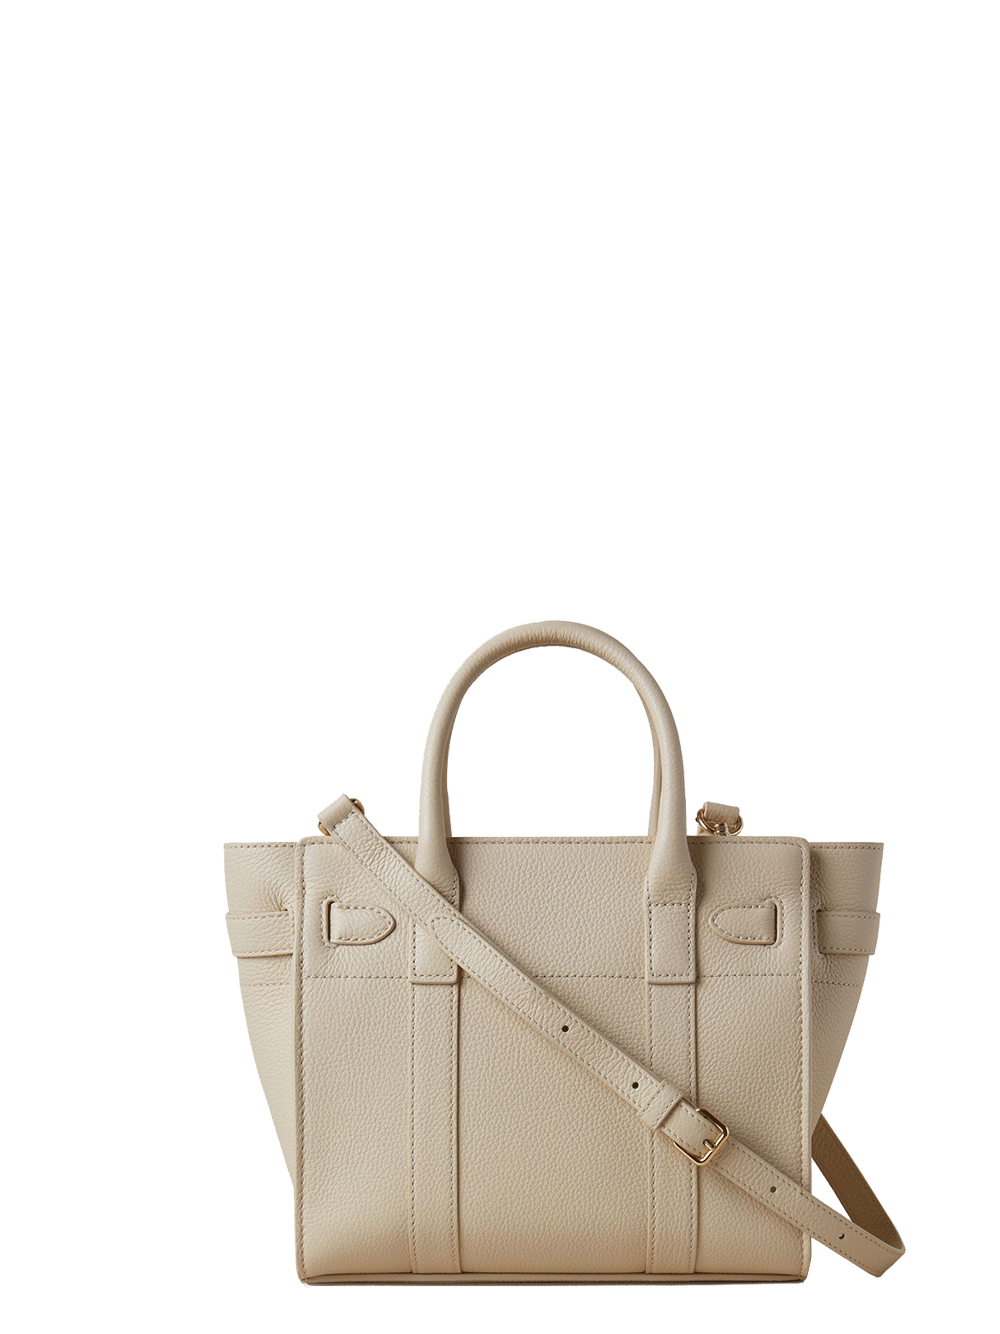 Mulberry-Mini-Zipped-Bayswater-Shoulder-Bag-Small-Classic-Grain-Off-White-2